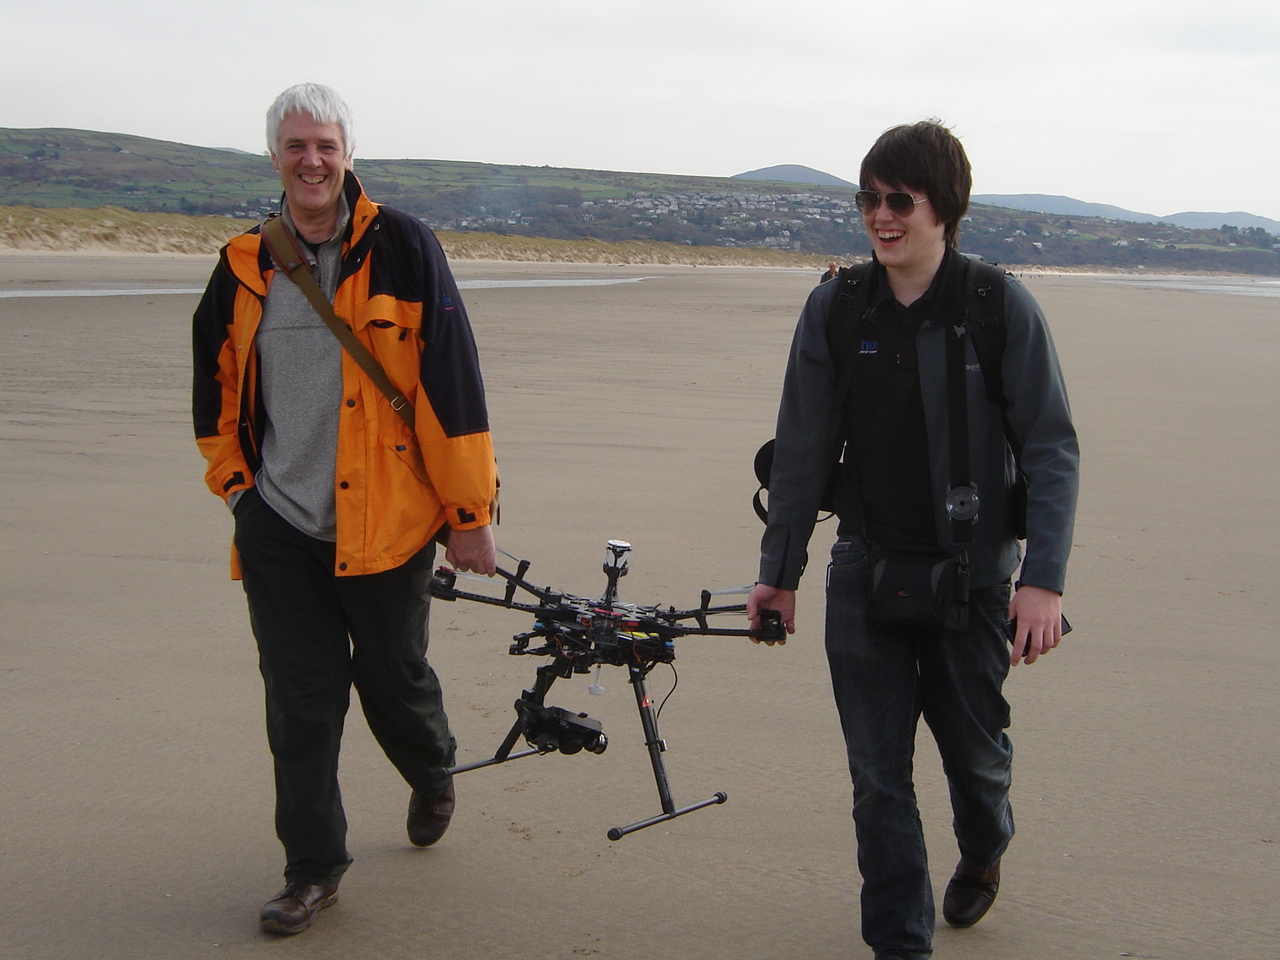 Skyonix using their drones to record the site from the air